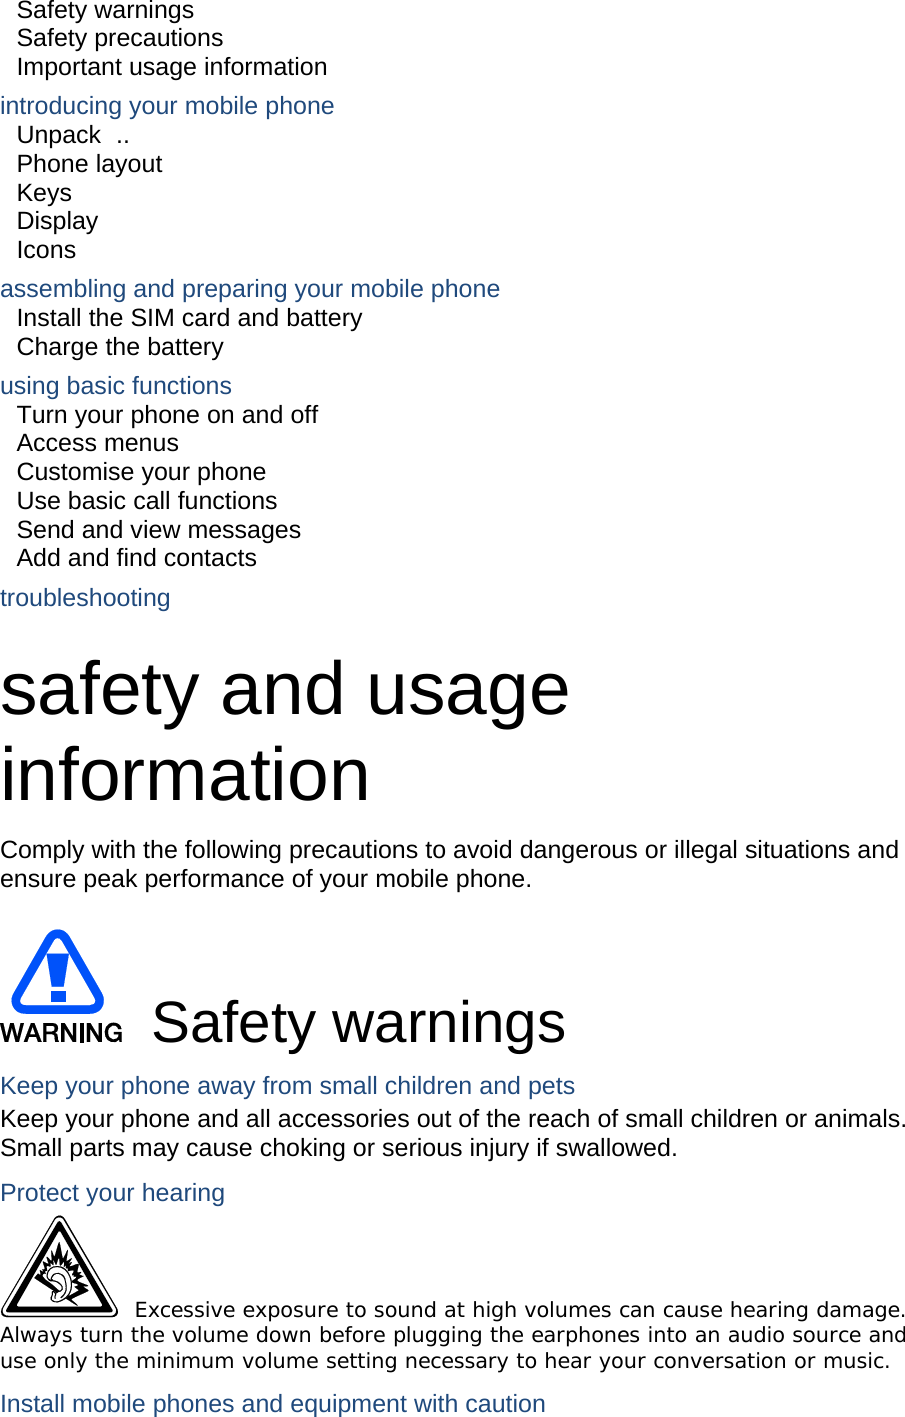 Safety warnings     Safety precautions     Important usage information     introducing your mobile phone     Unpack ..  Phone layout     Keys  Display  Icons assembling and preparing your mobile phone     Install the SIM card and battery     Charge the battery     using basic functions    Turn your phone on and off    Access menus     Customise your phone     Use basic call functions     Send and view messages     Add and find contacts     troubleshooting     safety and usage information  Comply with the following precautions to avoid dangerous or illegal situations and ensure peak performance of your mobile phone.   Safety warnings Keep your phone away from small children and pets Keep your phone and all accessories out of the reach of small children or animals. Small parts may cause choking or serious injury if swallowed. Protect your hearing  Excessive exposure to sound at high volumes can cause hearing damage. Always turn the volume down before plugging the earphones into an audio source and use only the minimum volume setting necessary to hear your conversation or music. Install mobile phones and equipment with caution 